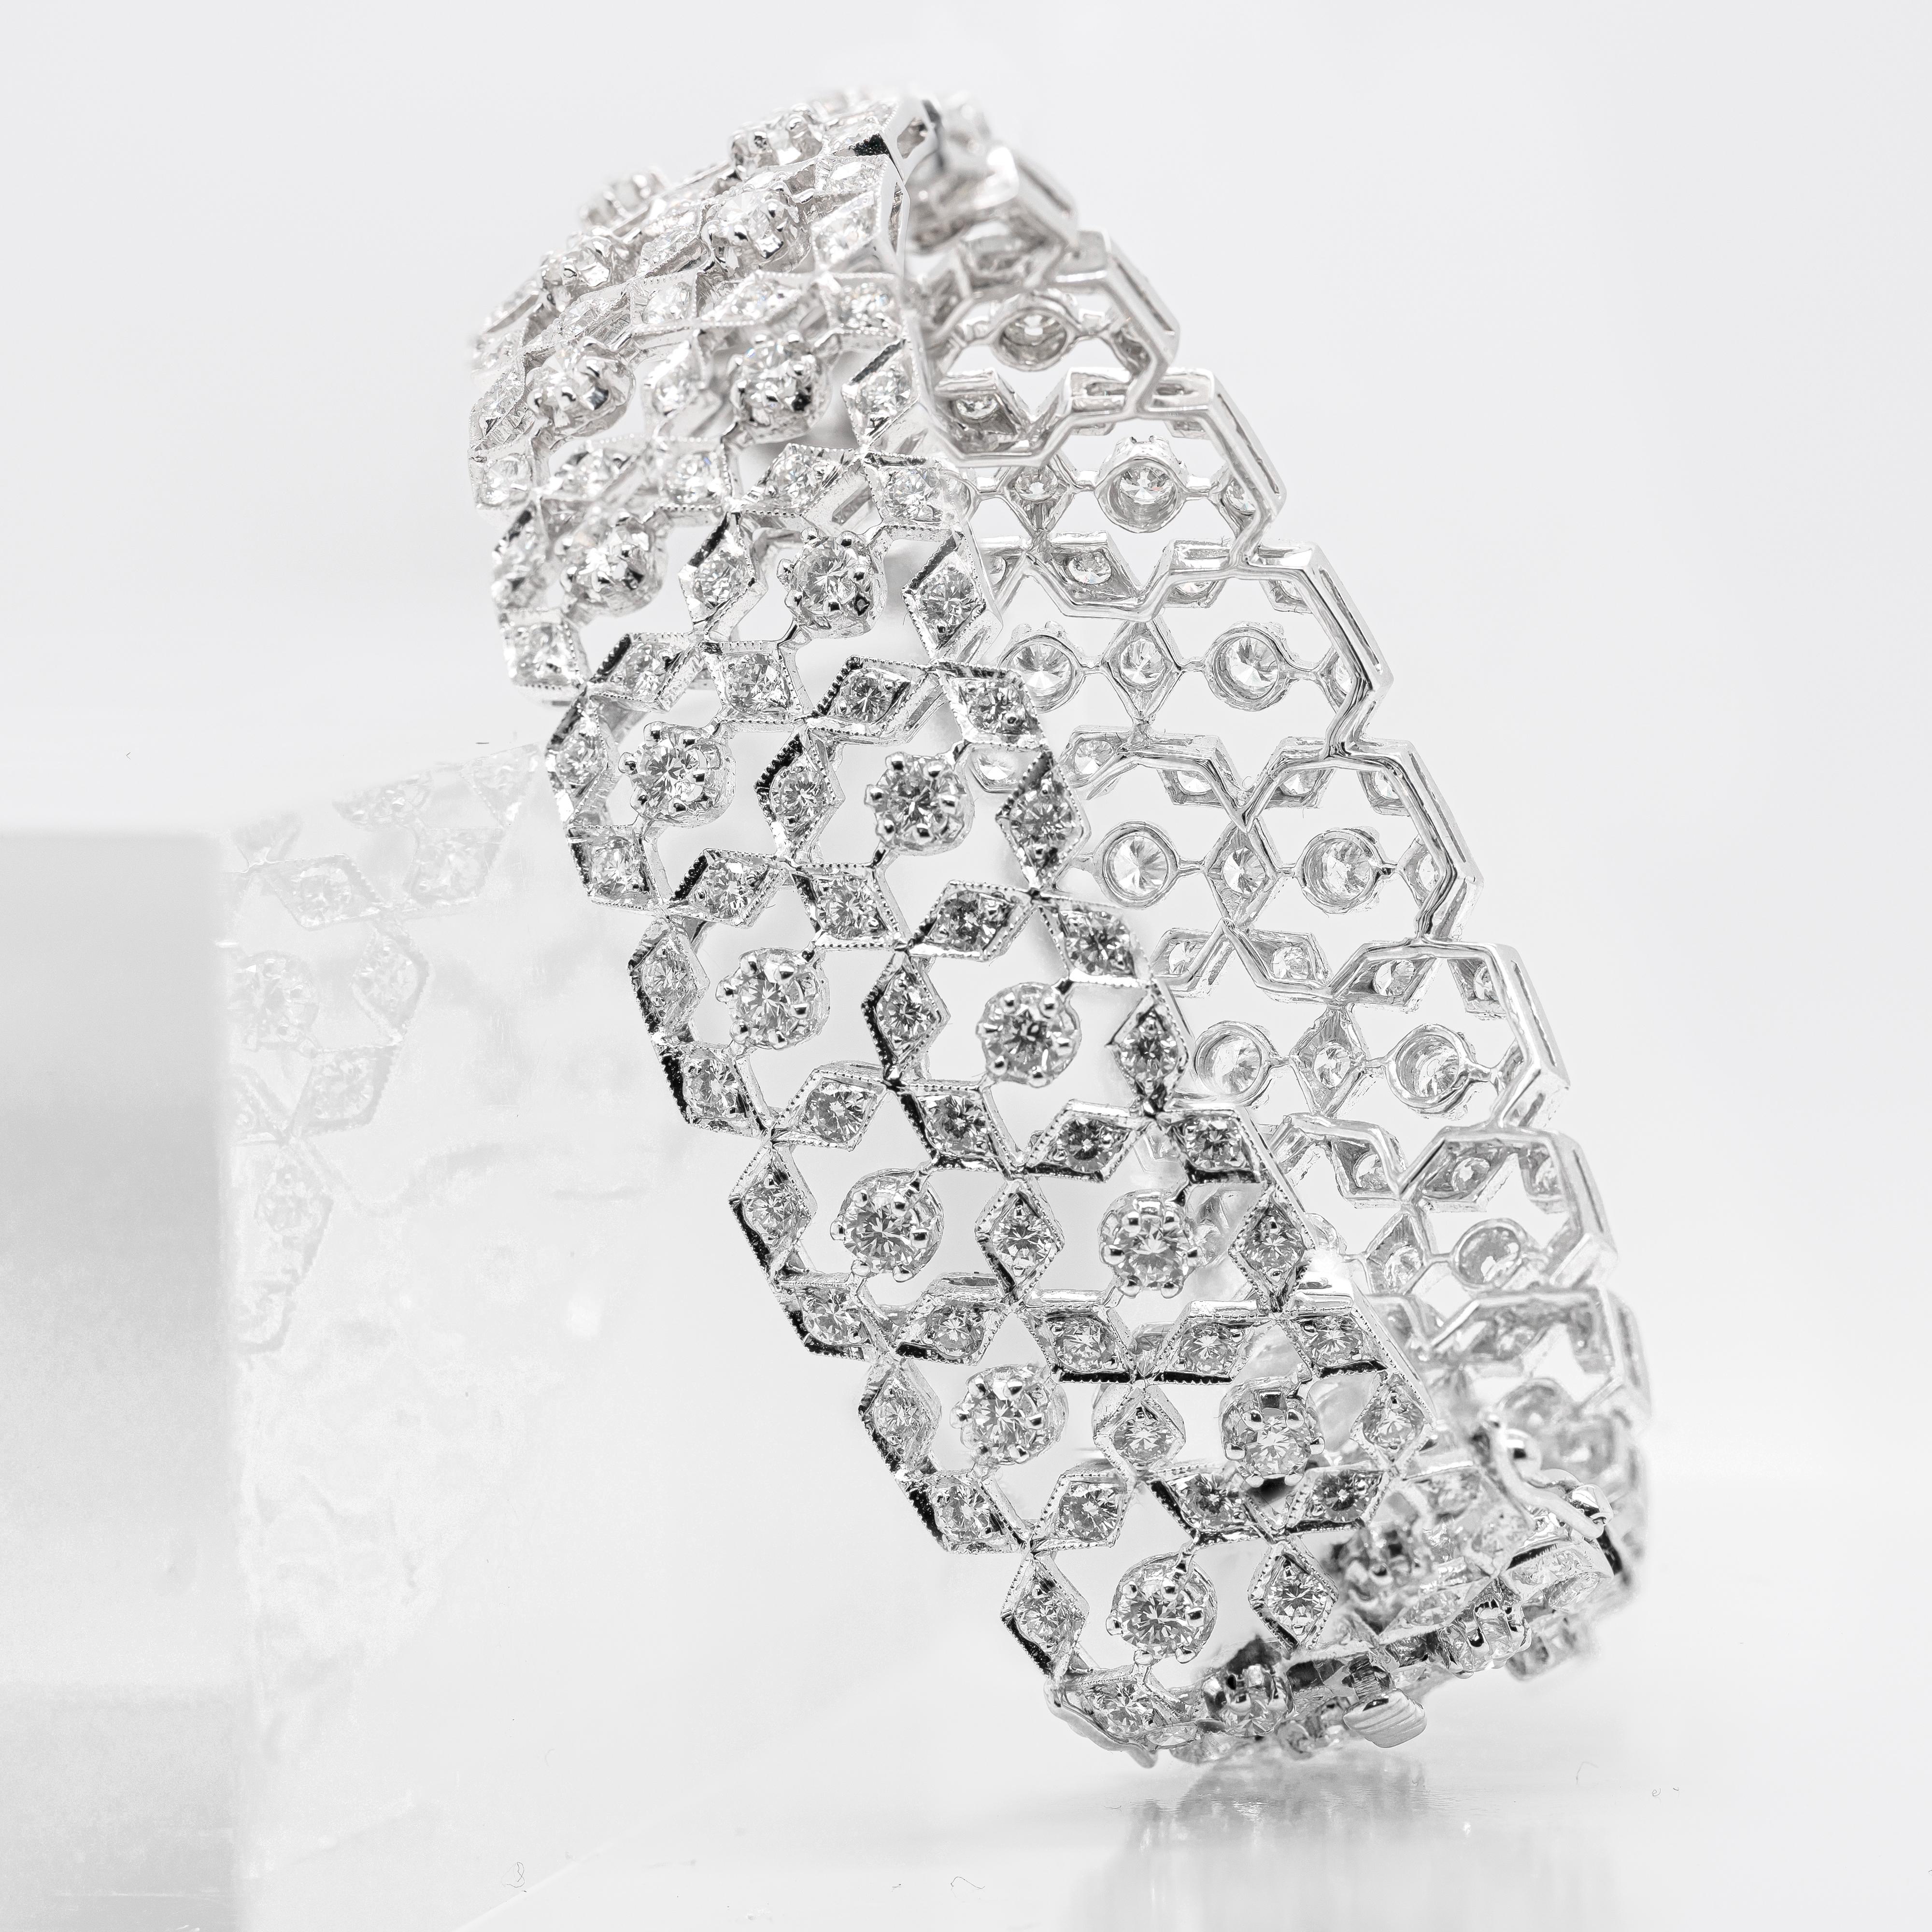 This 18 carat white gold bangle features an impressive open work design consisting of hexagonal shapes that are interlocking to create this beautiful and exquisite piece. The delicate hexagons are composed of six fine quality brilliant cut diamonds